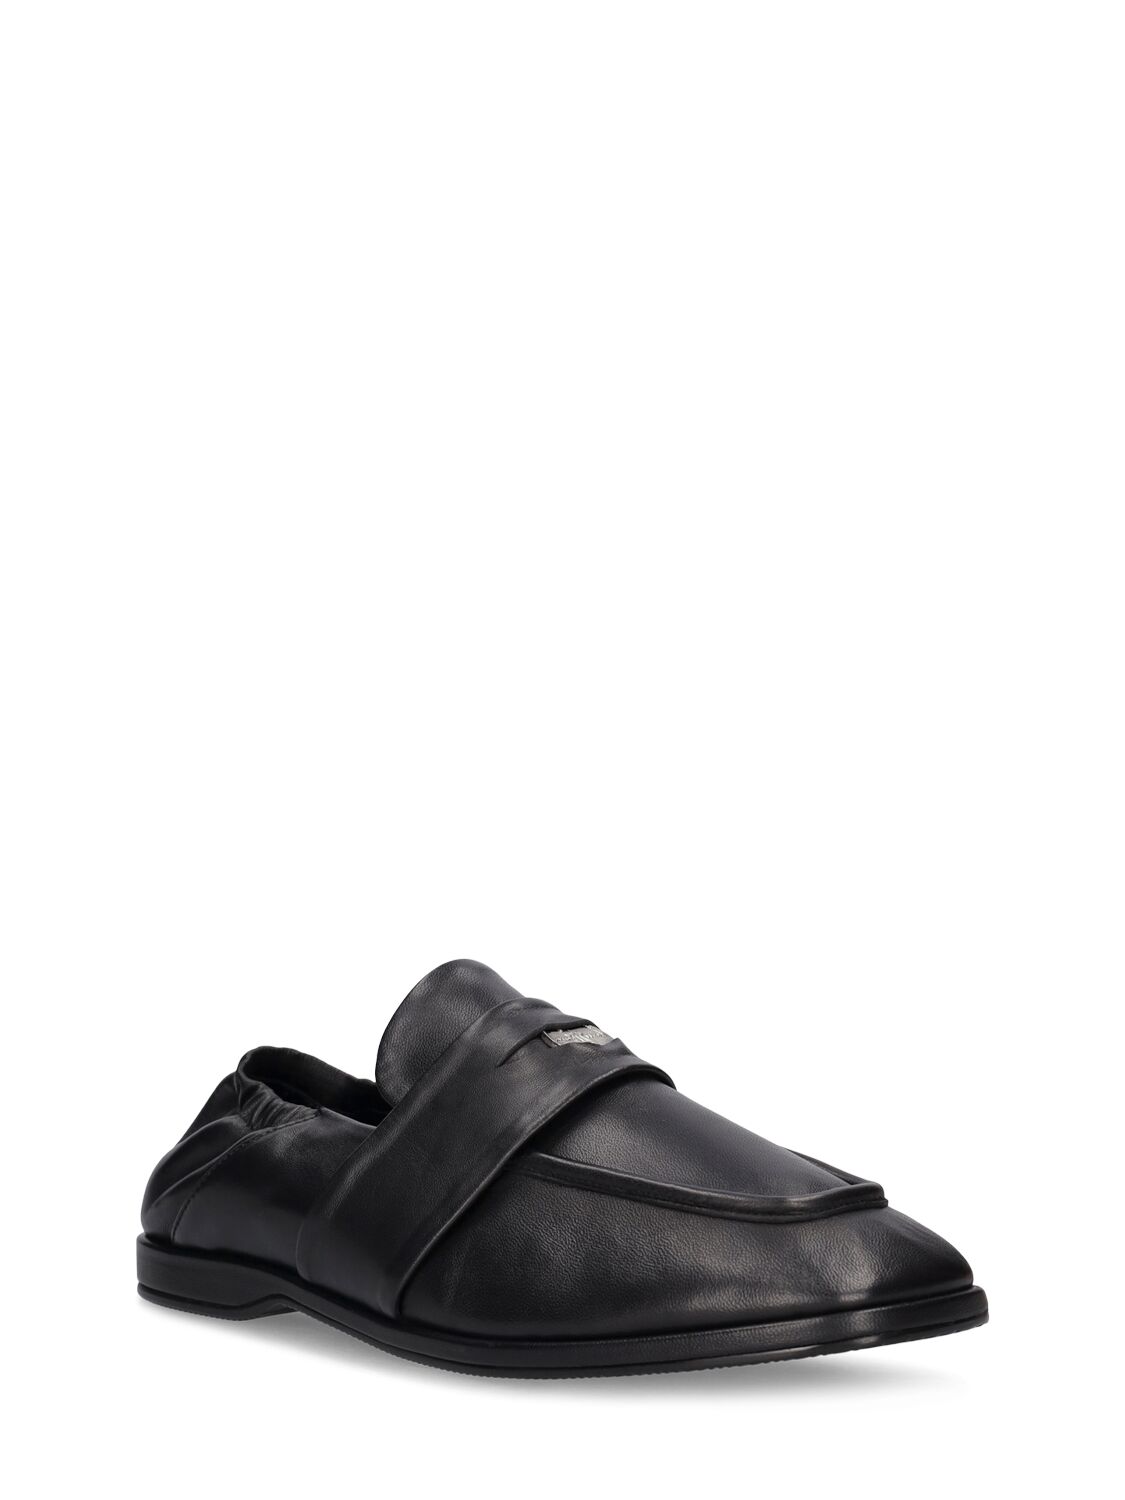 Shop After Pray Square Penny Loafers W/ Band In Black